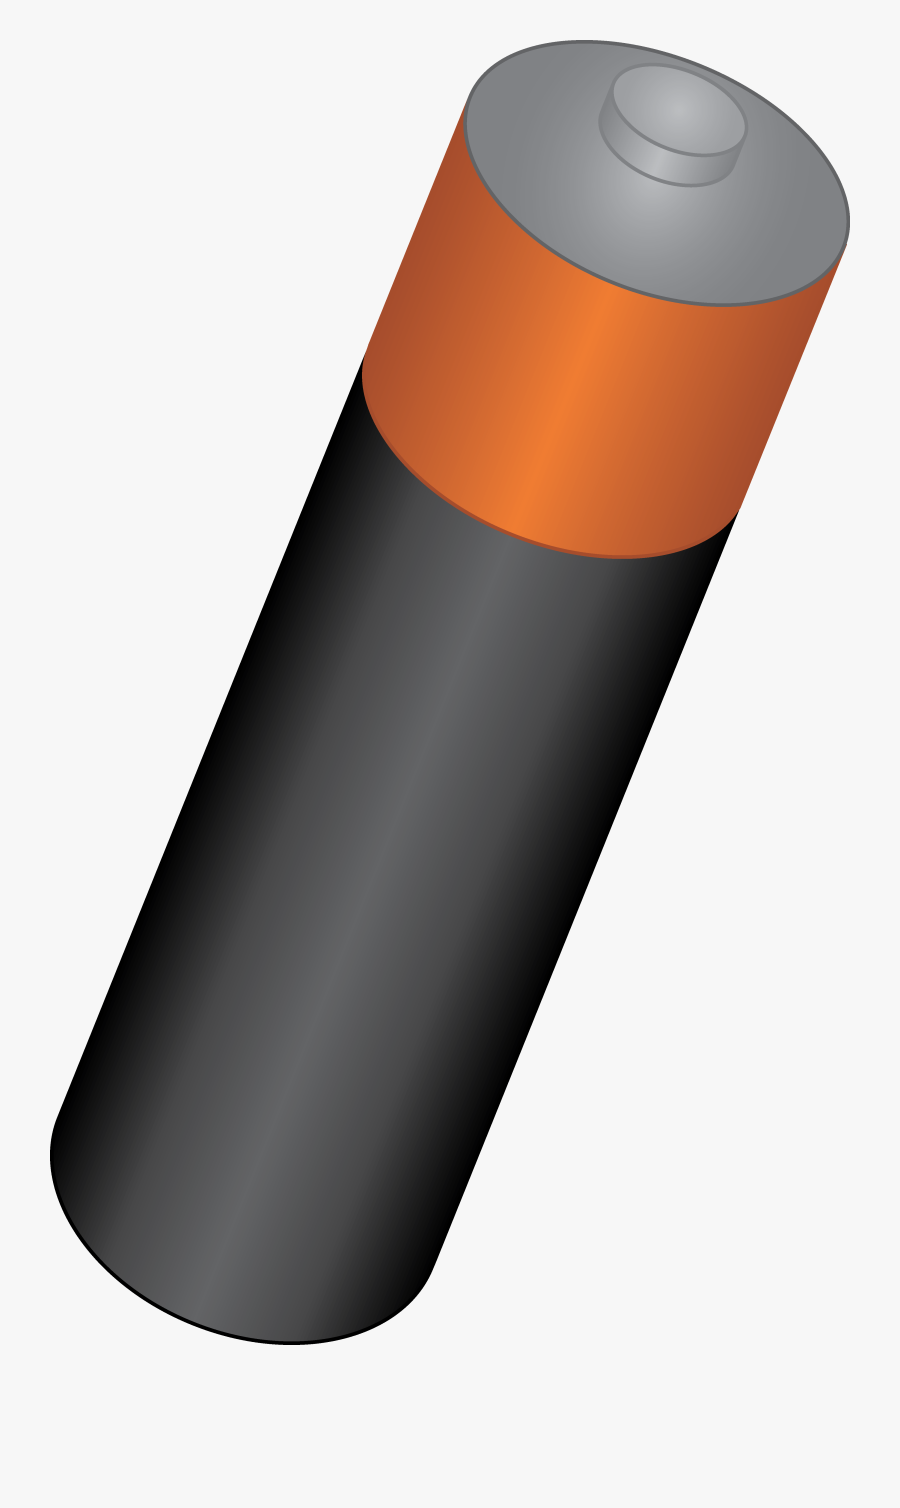 Single Aa Battery - Double A Battery Drawing, Transparent Clipart